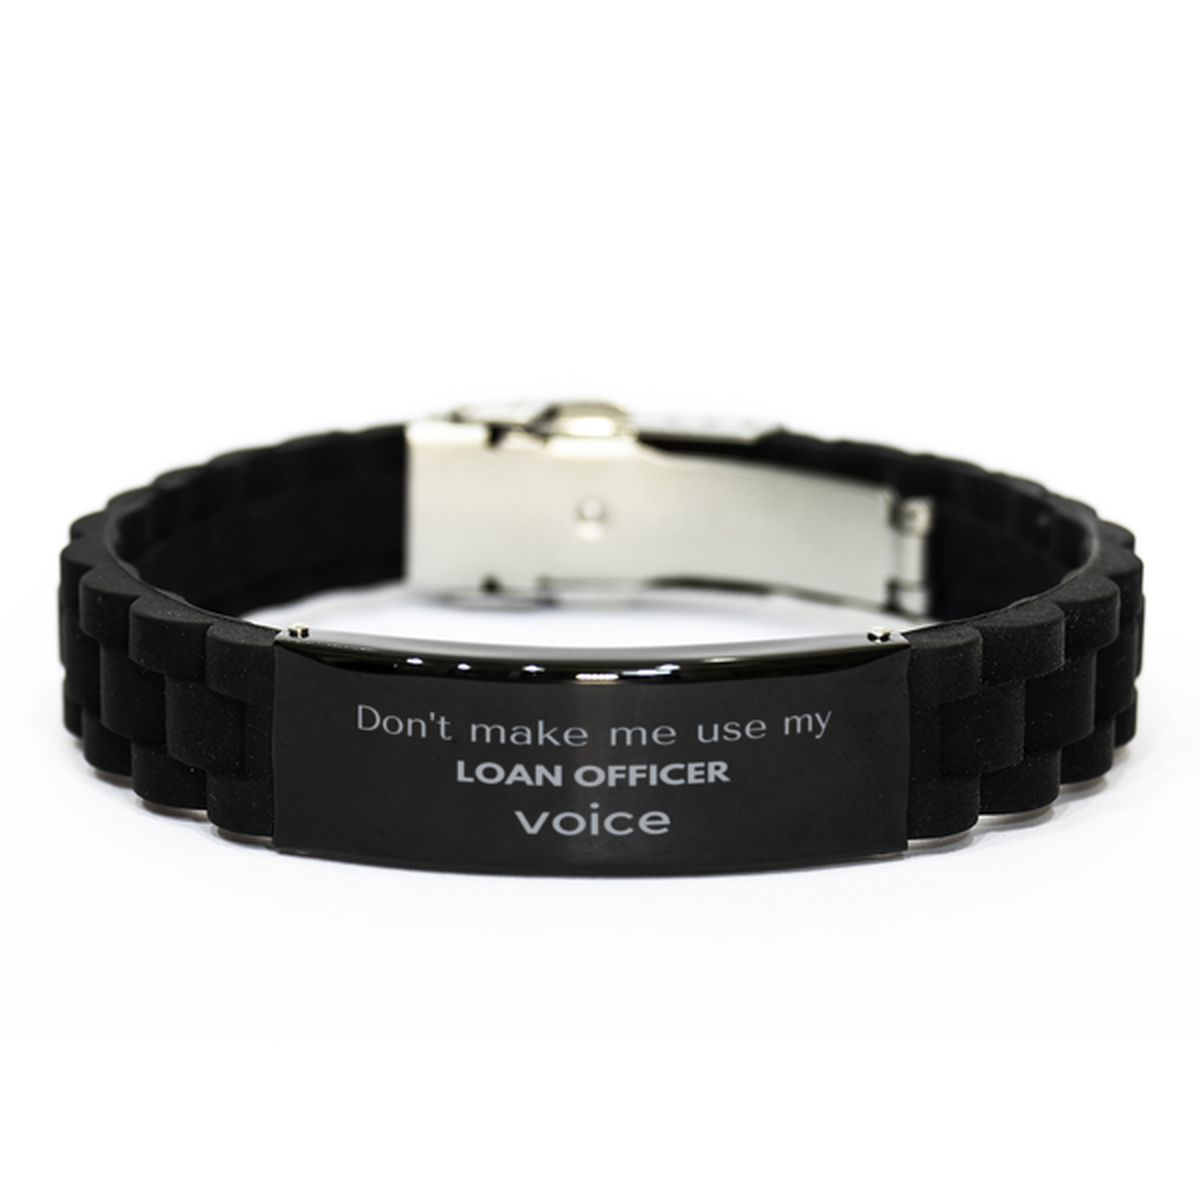 Don't make me use my Loan Officer voice, Sarcasm Loan Officer Gifts, Christmas Loan Officer Black Glidelock Clasp Bracelet Birthday Unique Gifts For Loan Officer Coworkers, Men, Women, Colleague, Friends